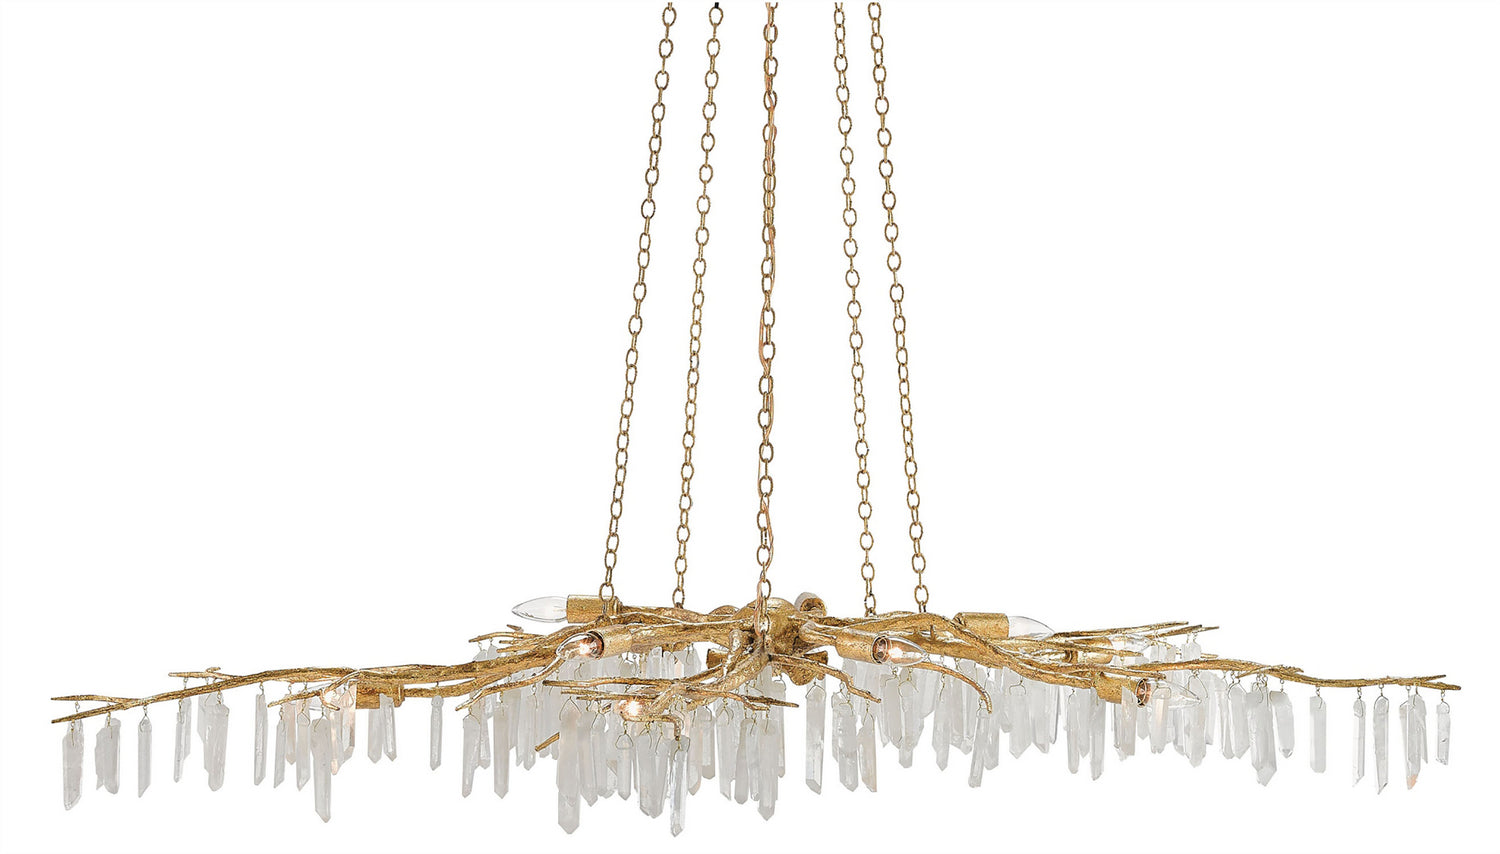 Ten Light Chandelier from the Aviva Stanoff collection in Washed Lucerne Gold/Natural finish